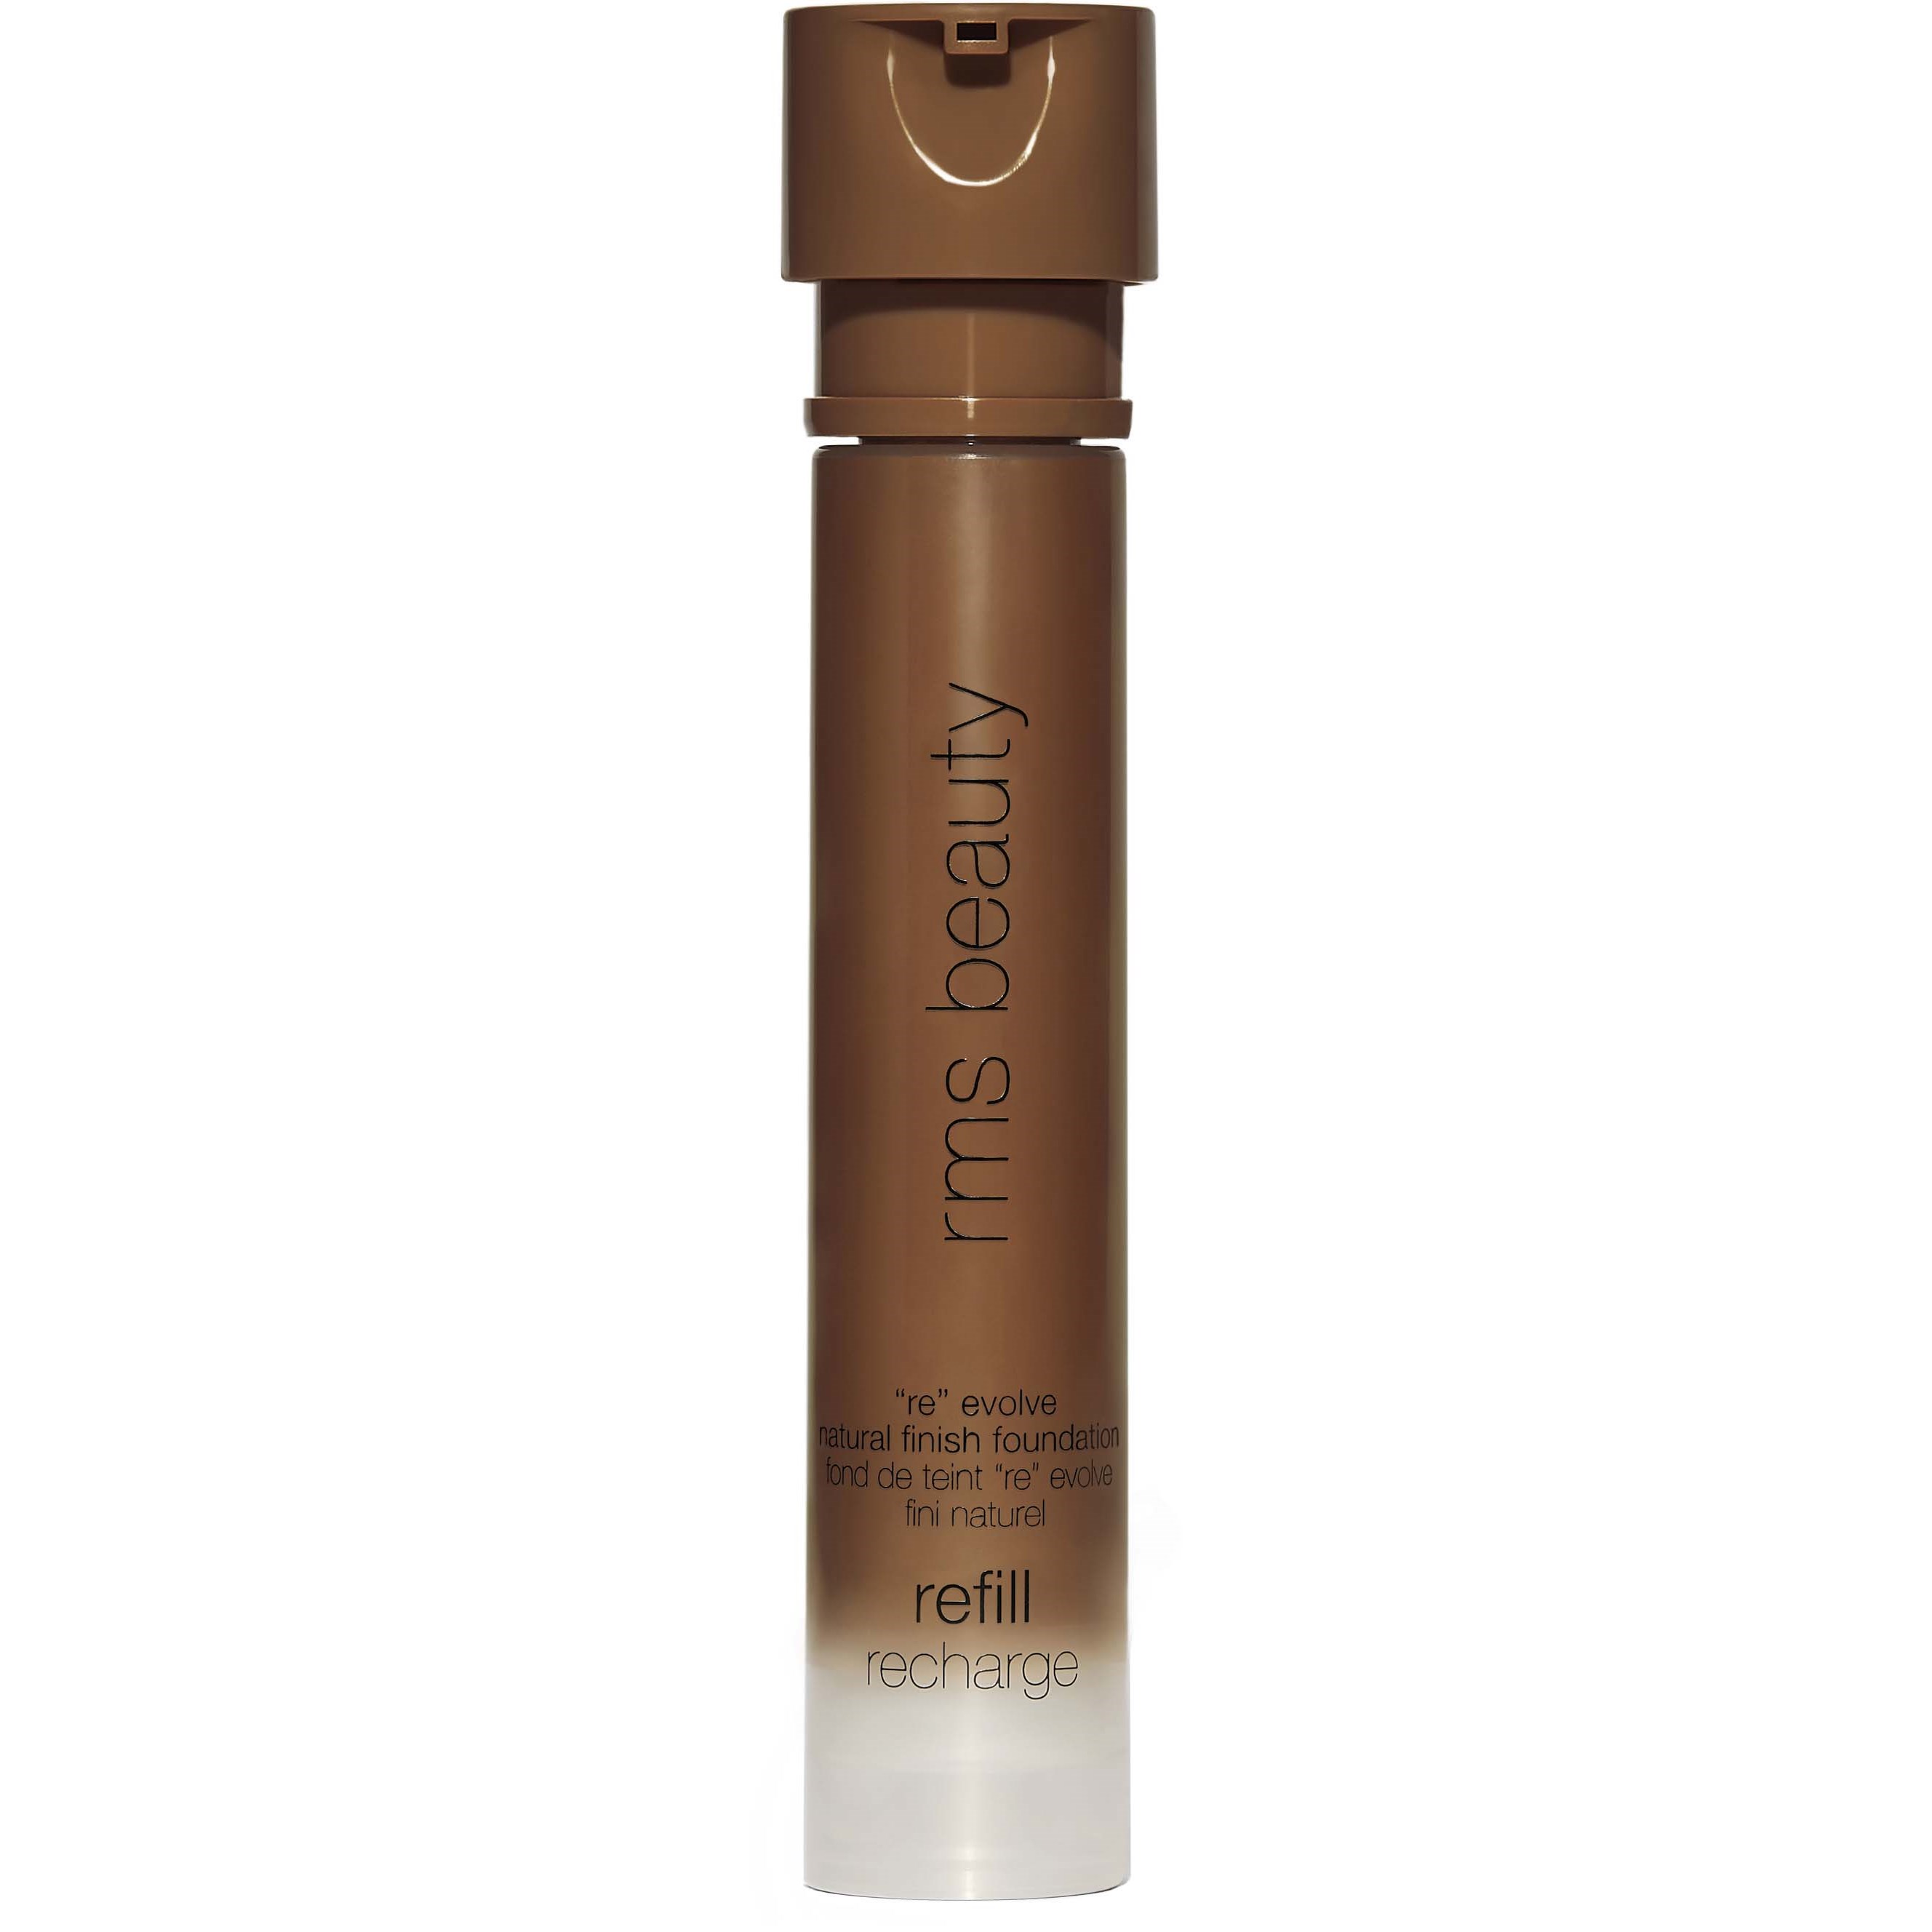 RMS Beauty ReEvolve Natural Finish Foundation Refill 122